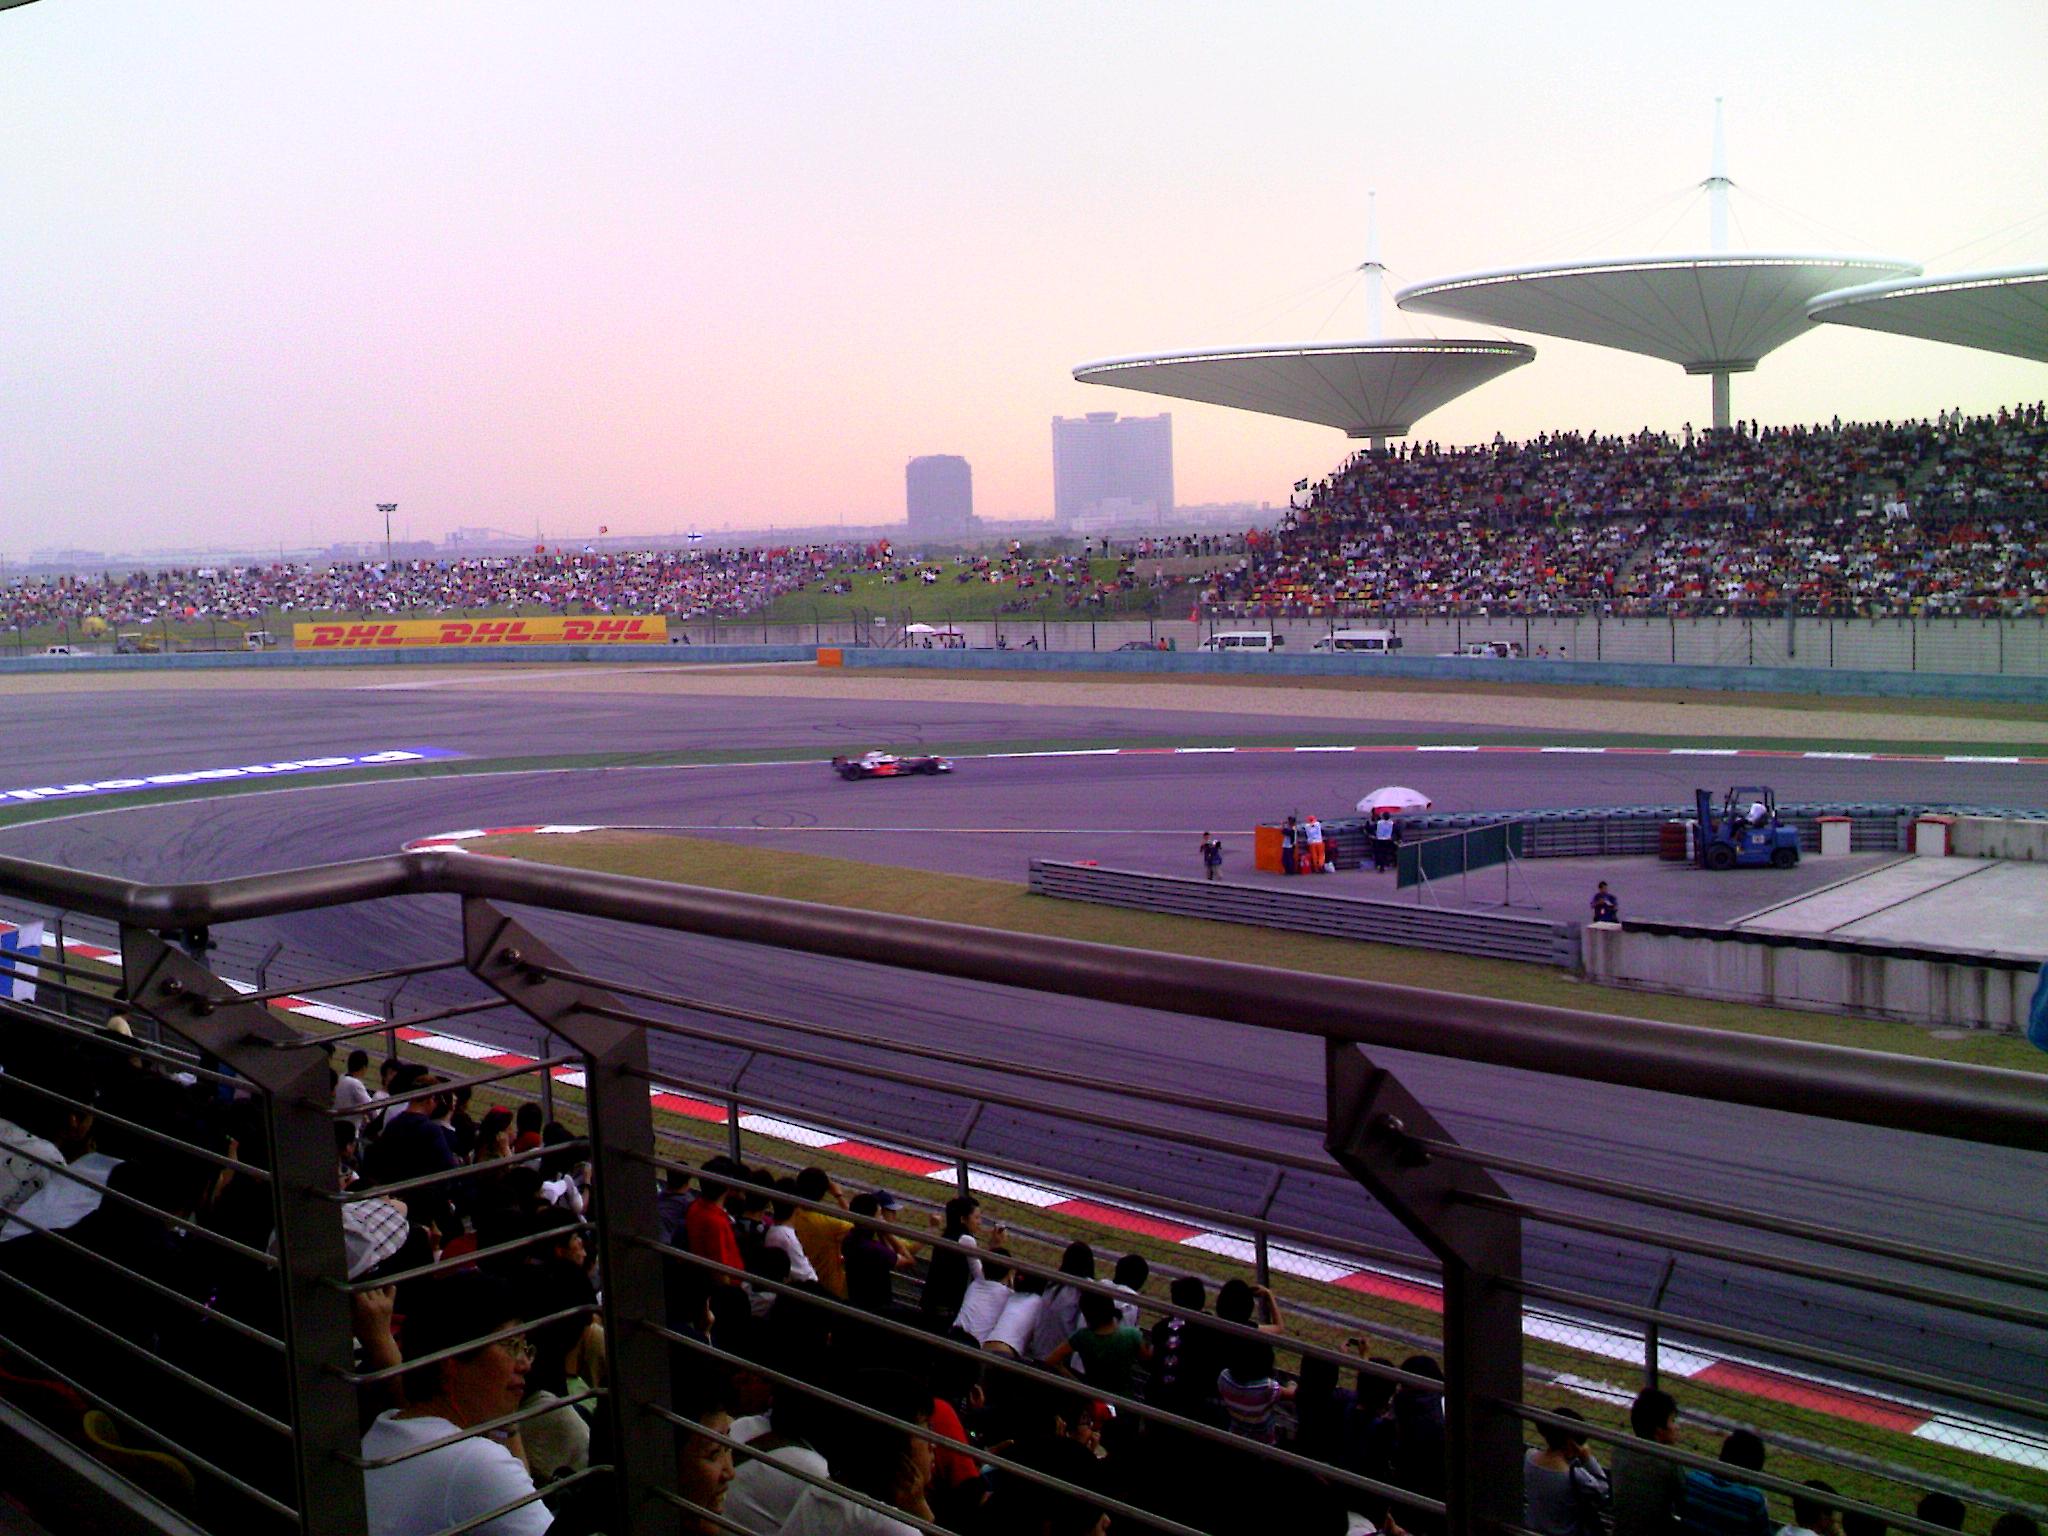 View from Grandstand